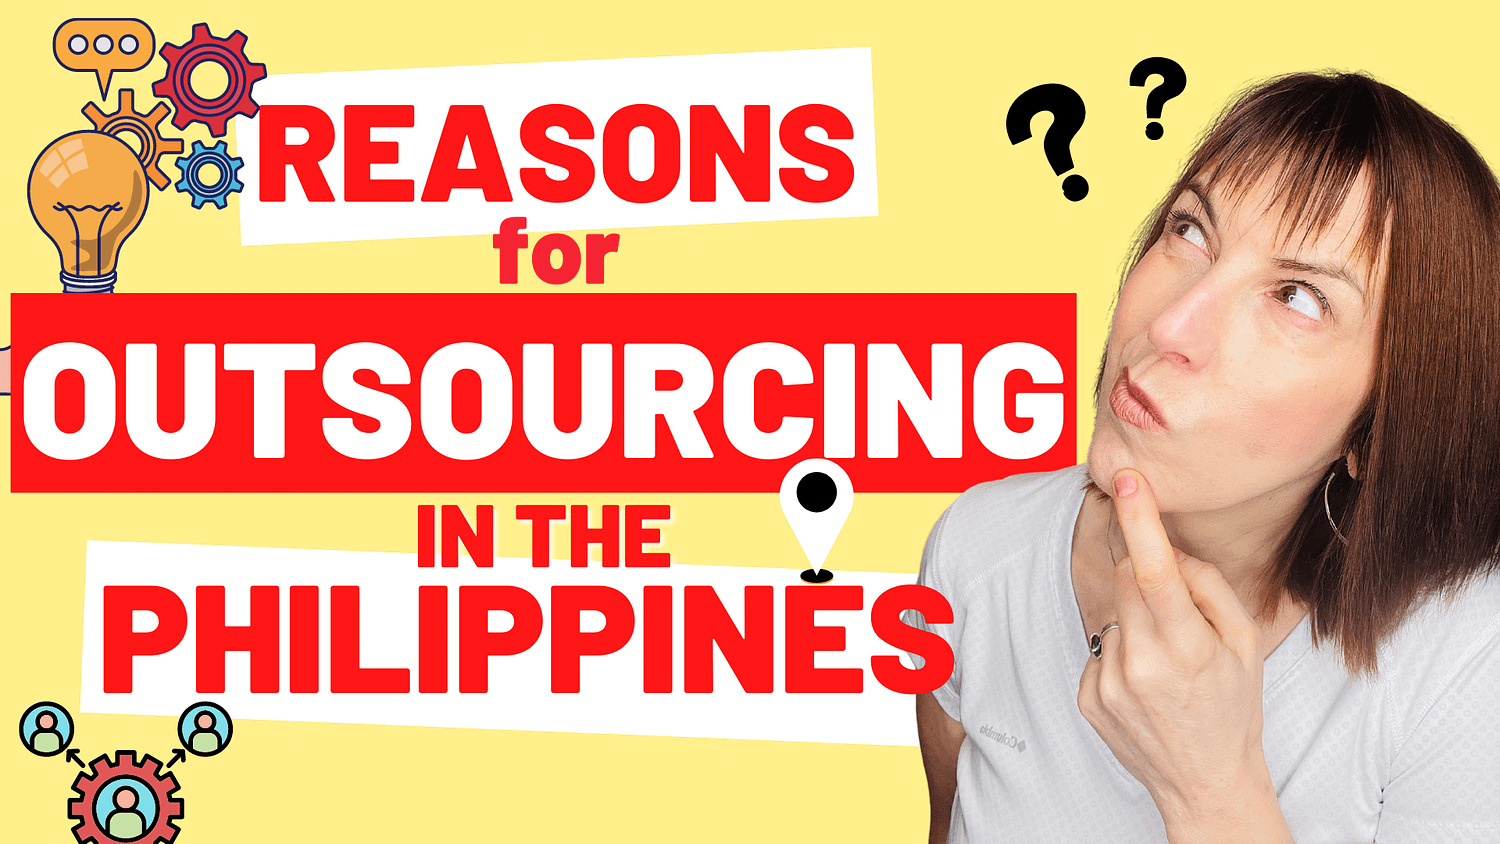 The Top 3 Reasons For Outsourcing In The Philippines